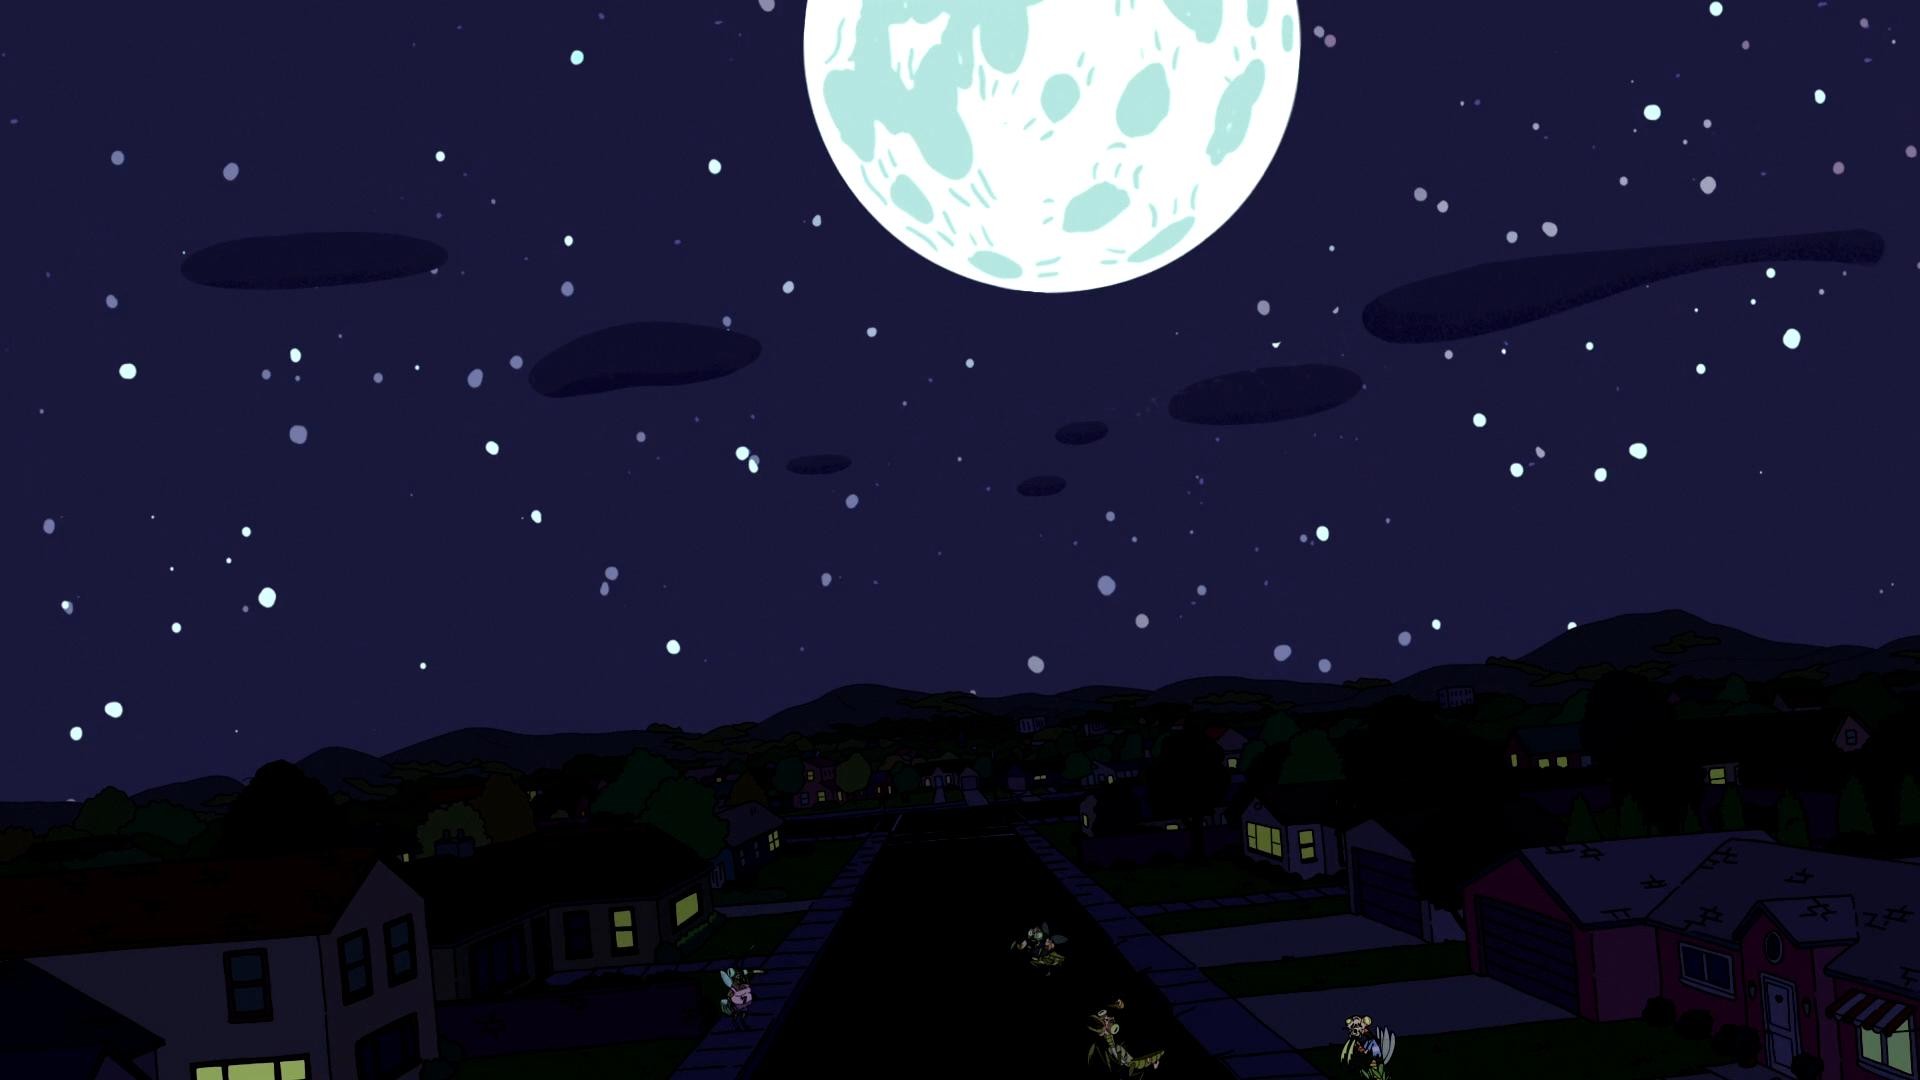 Computer Wallpapers Rick Morty with resolution 1920X1080 pixel. You can use this wallpaper as background for your desktop Computer Screensavers, Android or iPhone smartphones